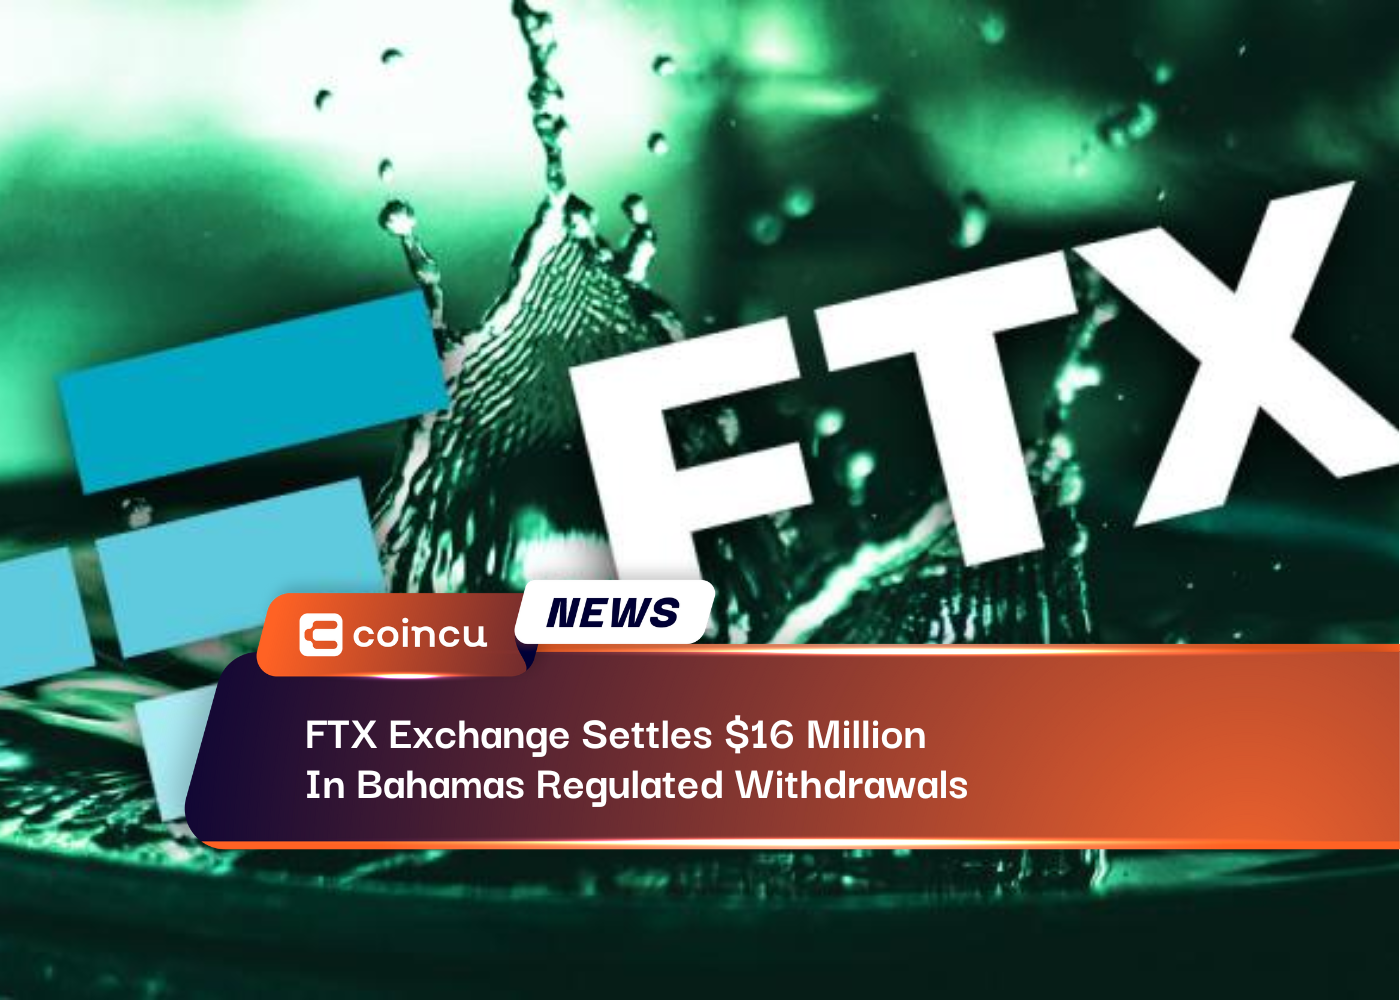 FTX Exchange Settles $16 Million In Bahamas Regulated Withdrawals